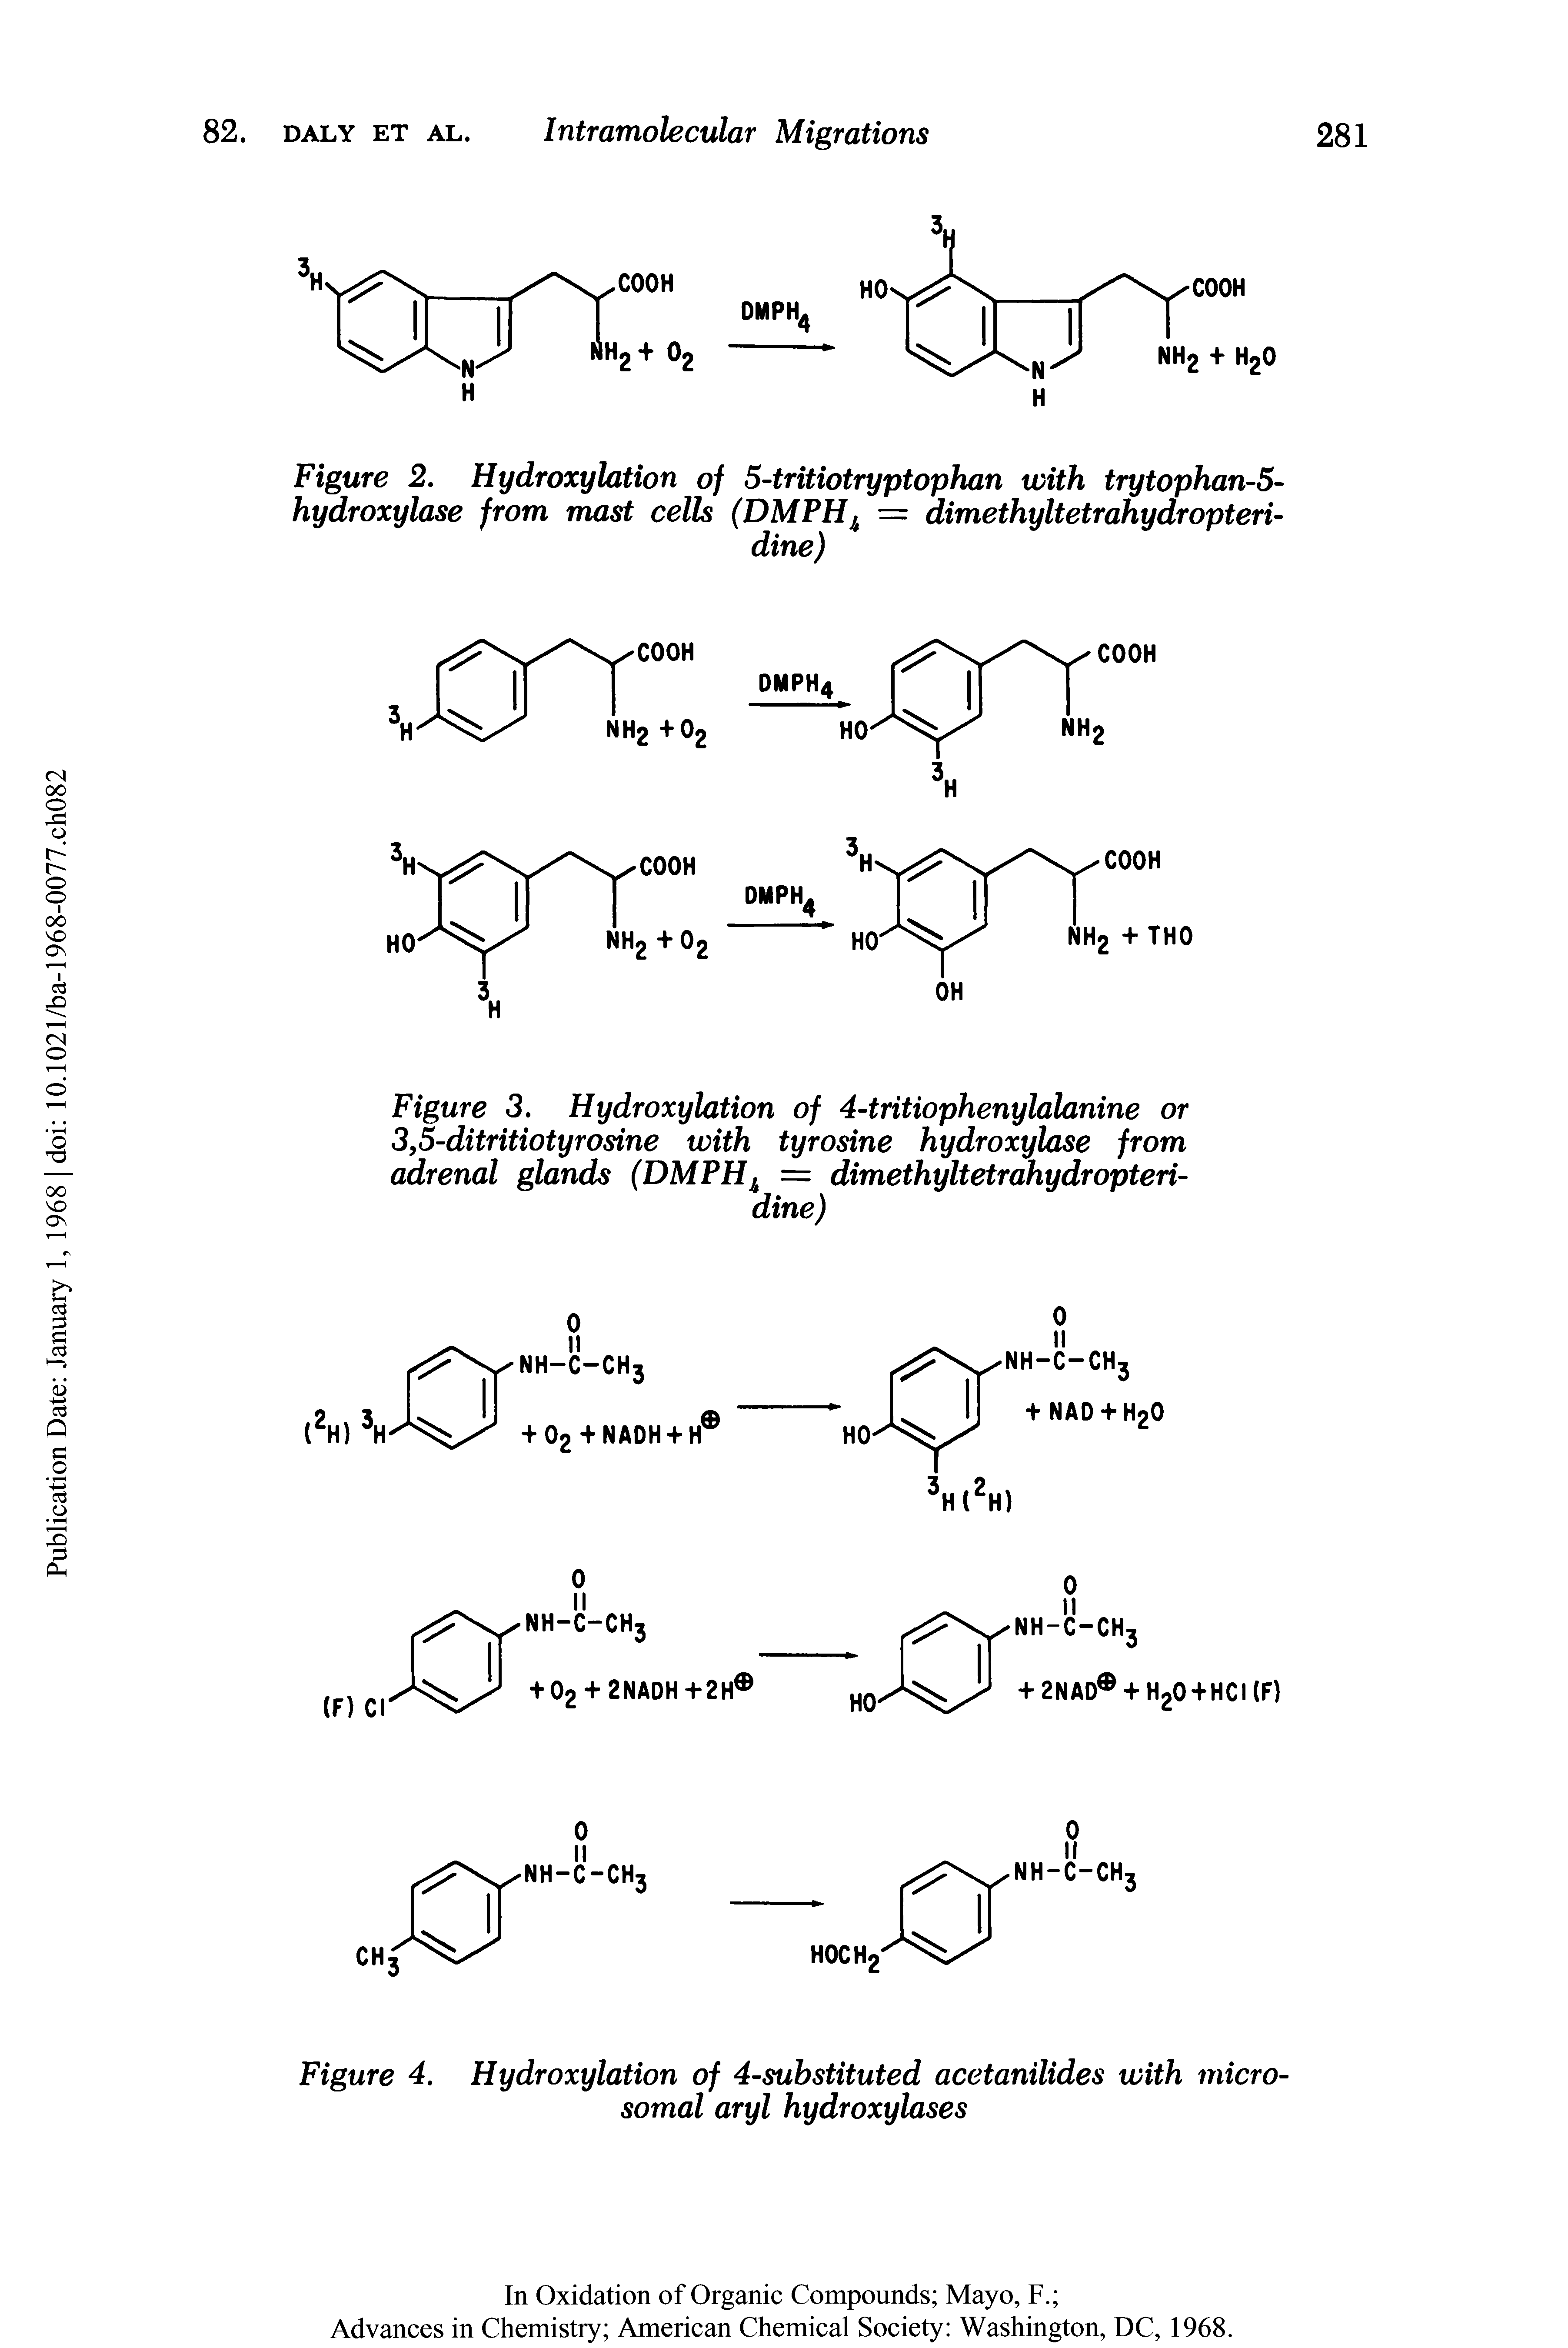 Figure 4. Hydroxylation of 4-suhstituted acetanilides with microsomal aryl hydroxylases...